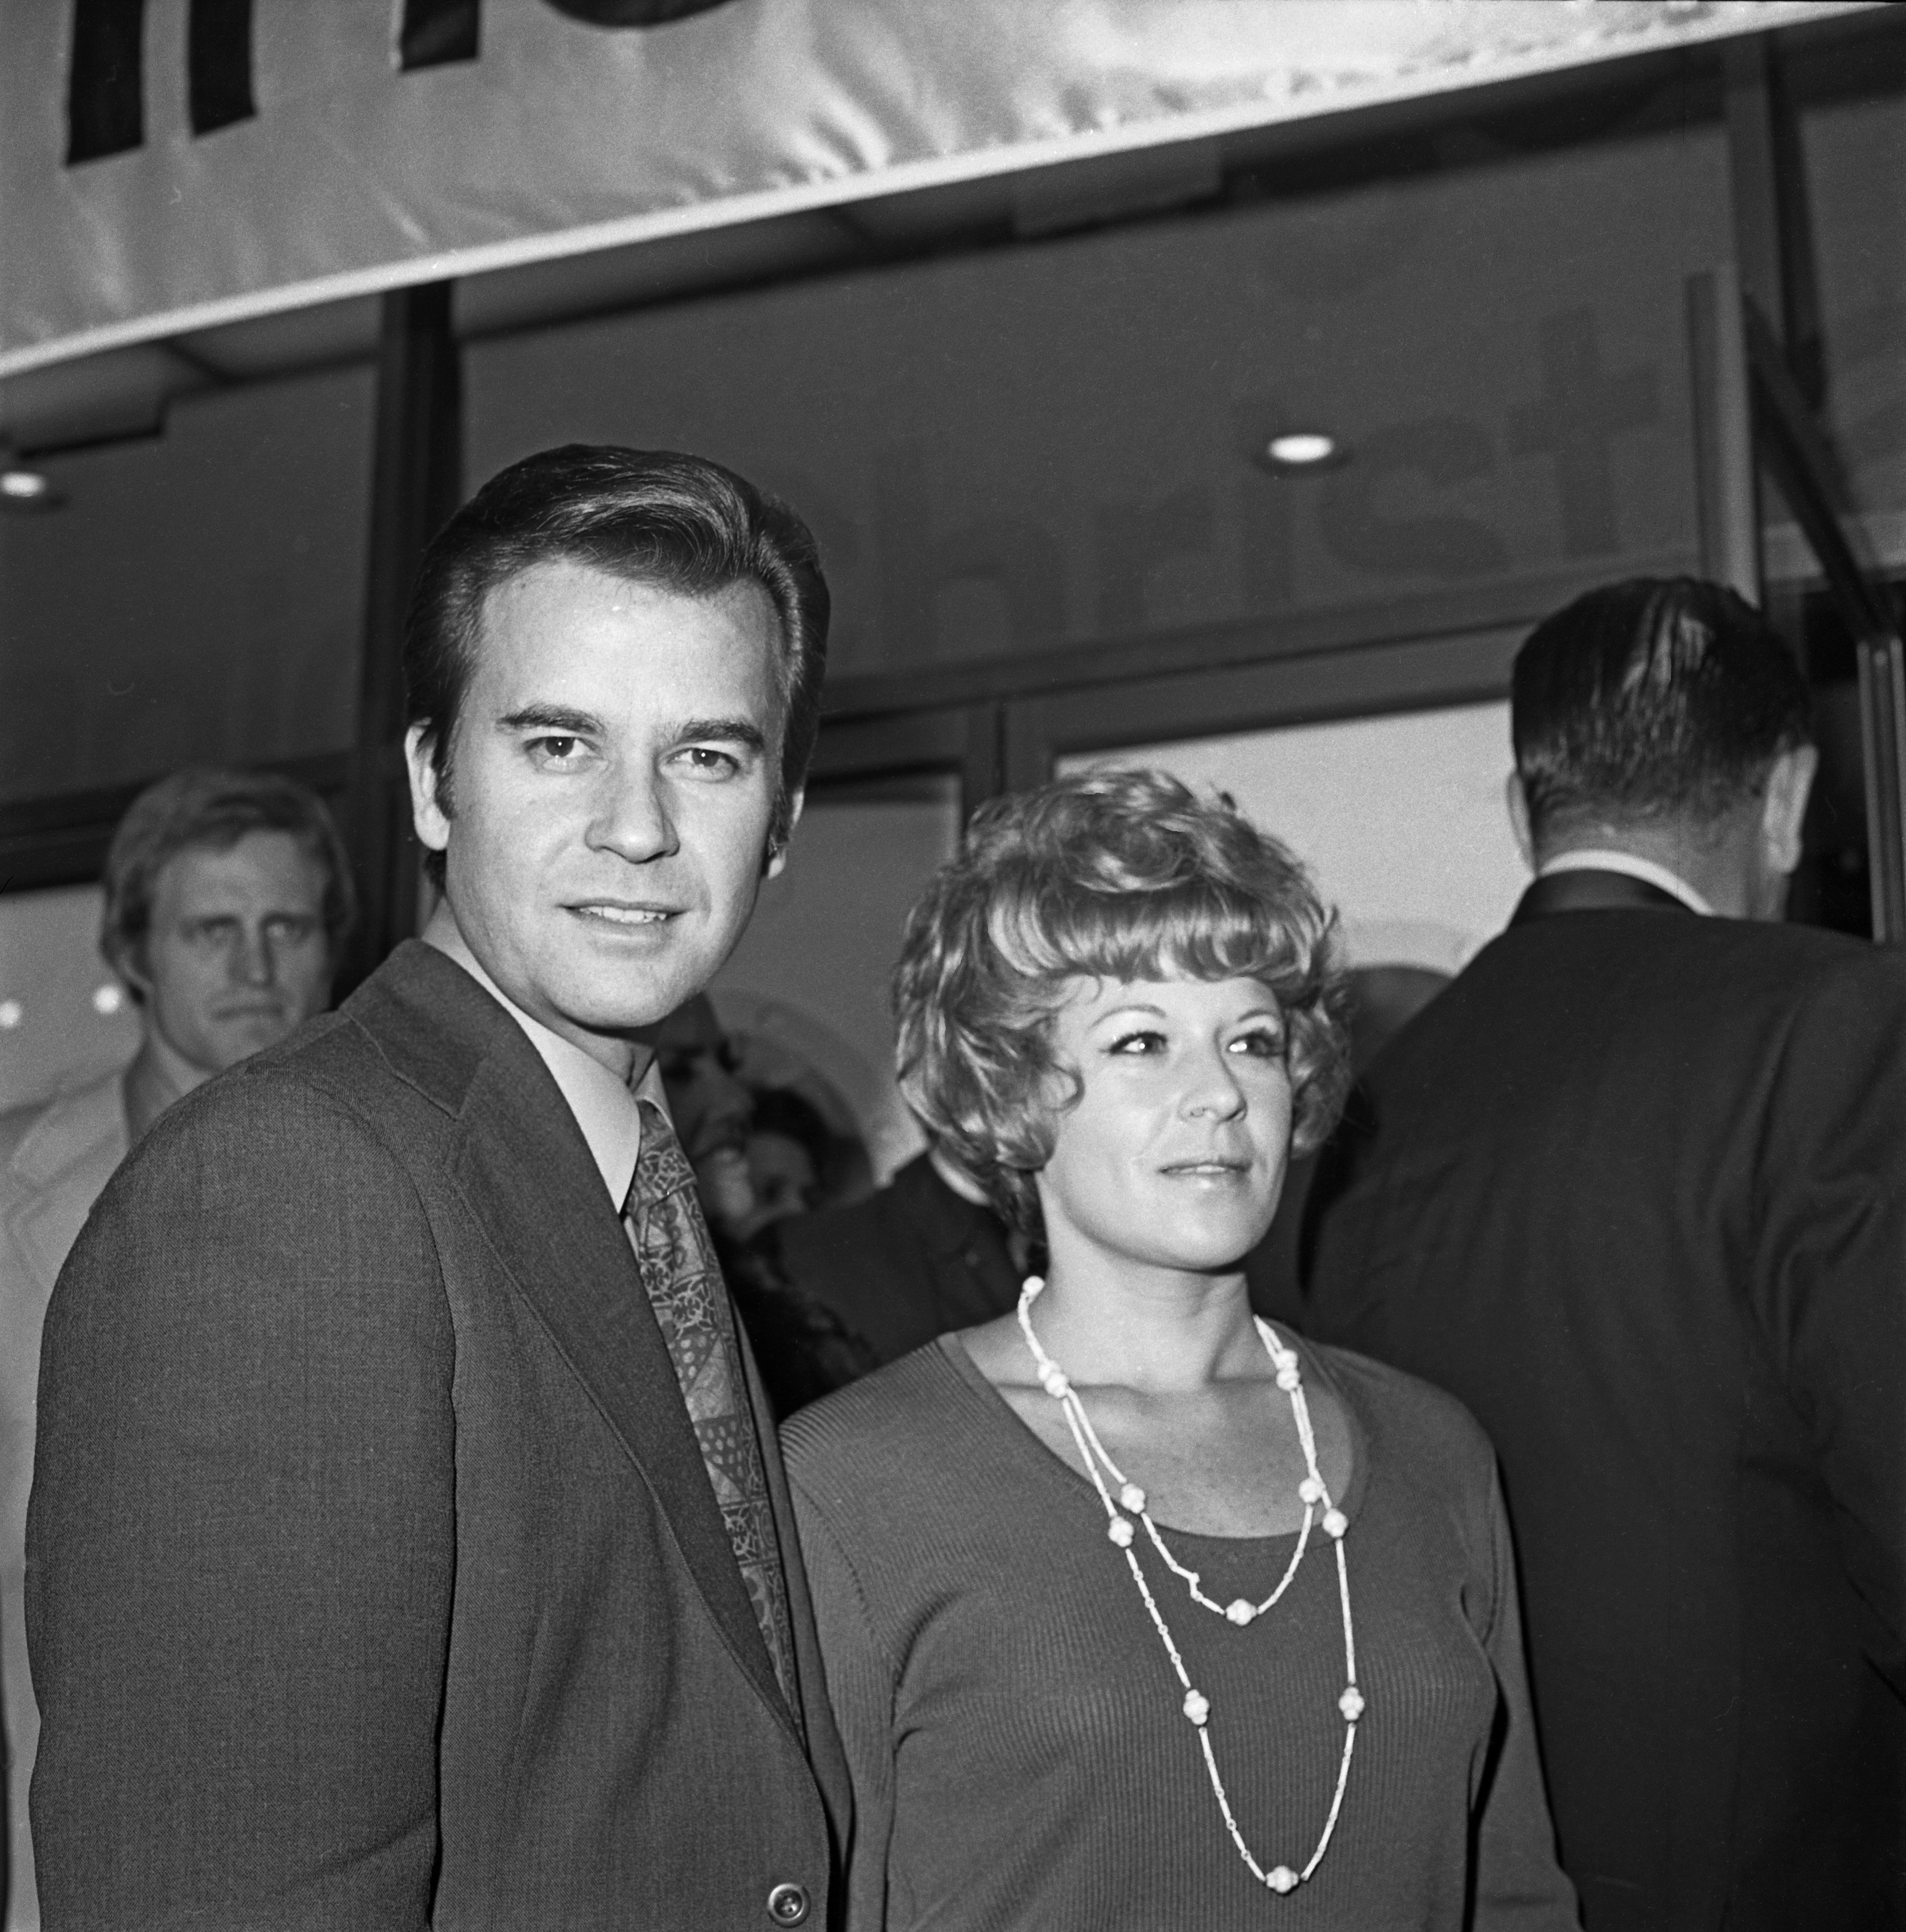 Dick Clark and Loretta Clark on February 1970 in Los Angeles, California | Source: Getty Images